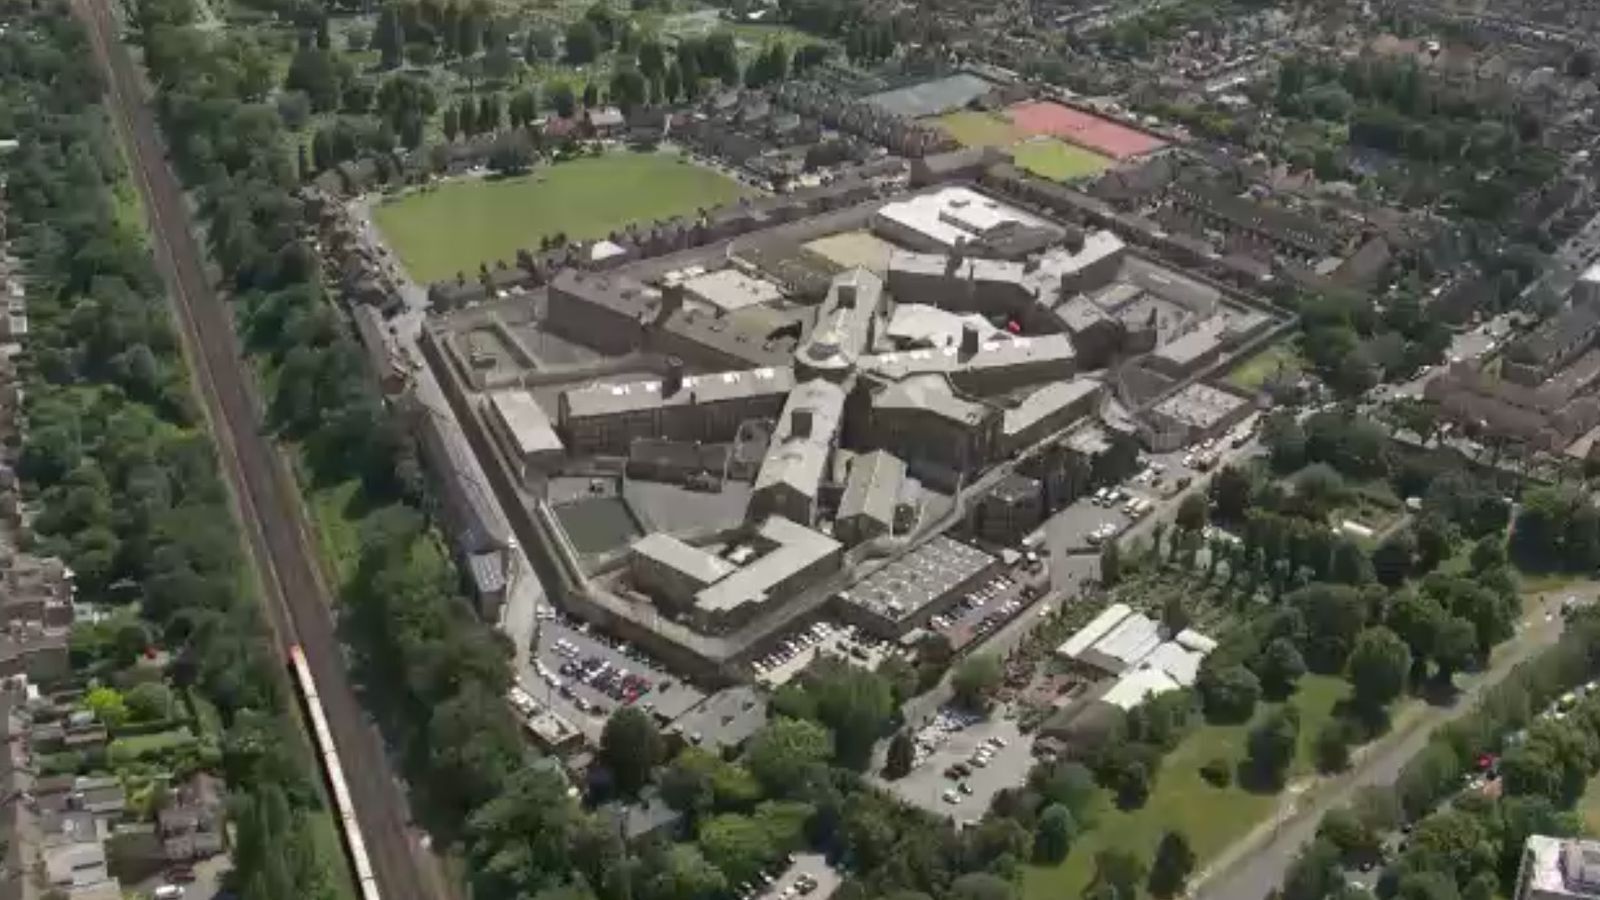 20-facts-about-hmp-wandsworth